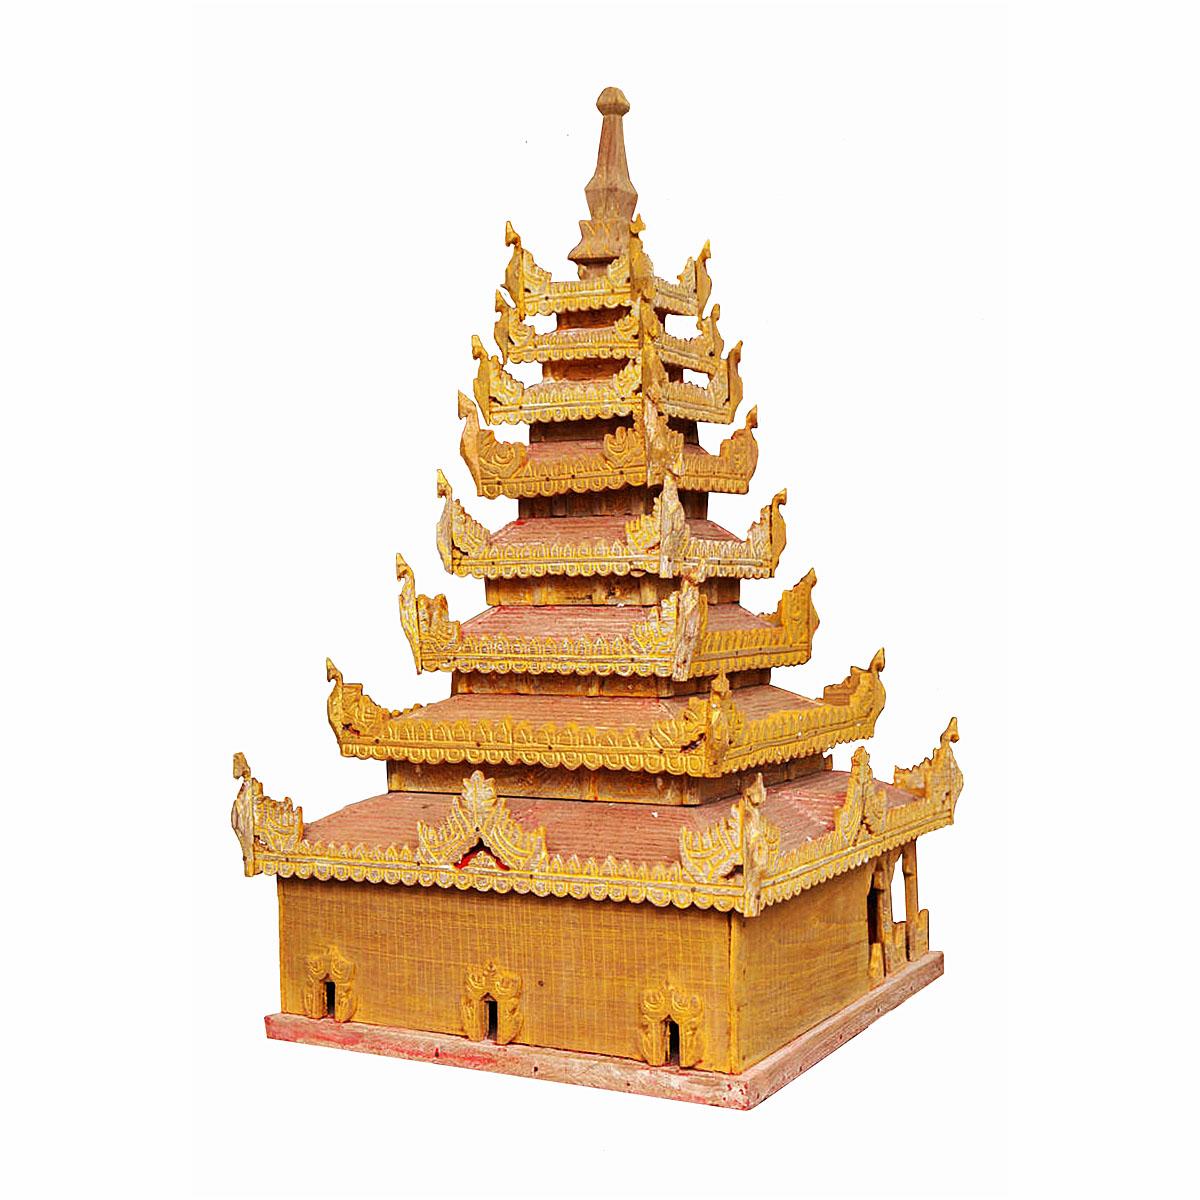 A hand carved miniature Thai temple in wood, painted gold and red with finely carved details. A model for a temple of the Mon people in southern Burma. 80 years old.